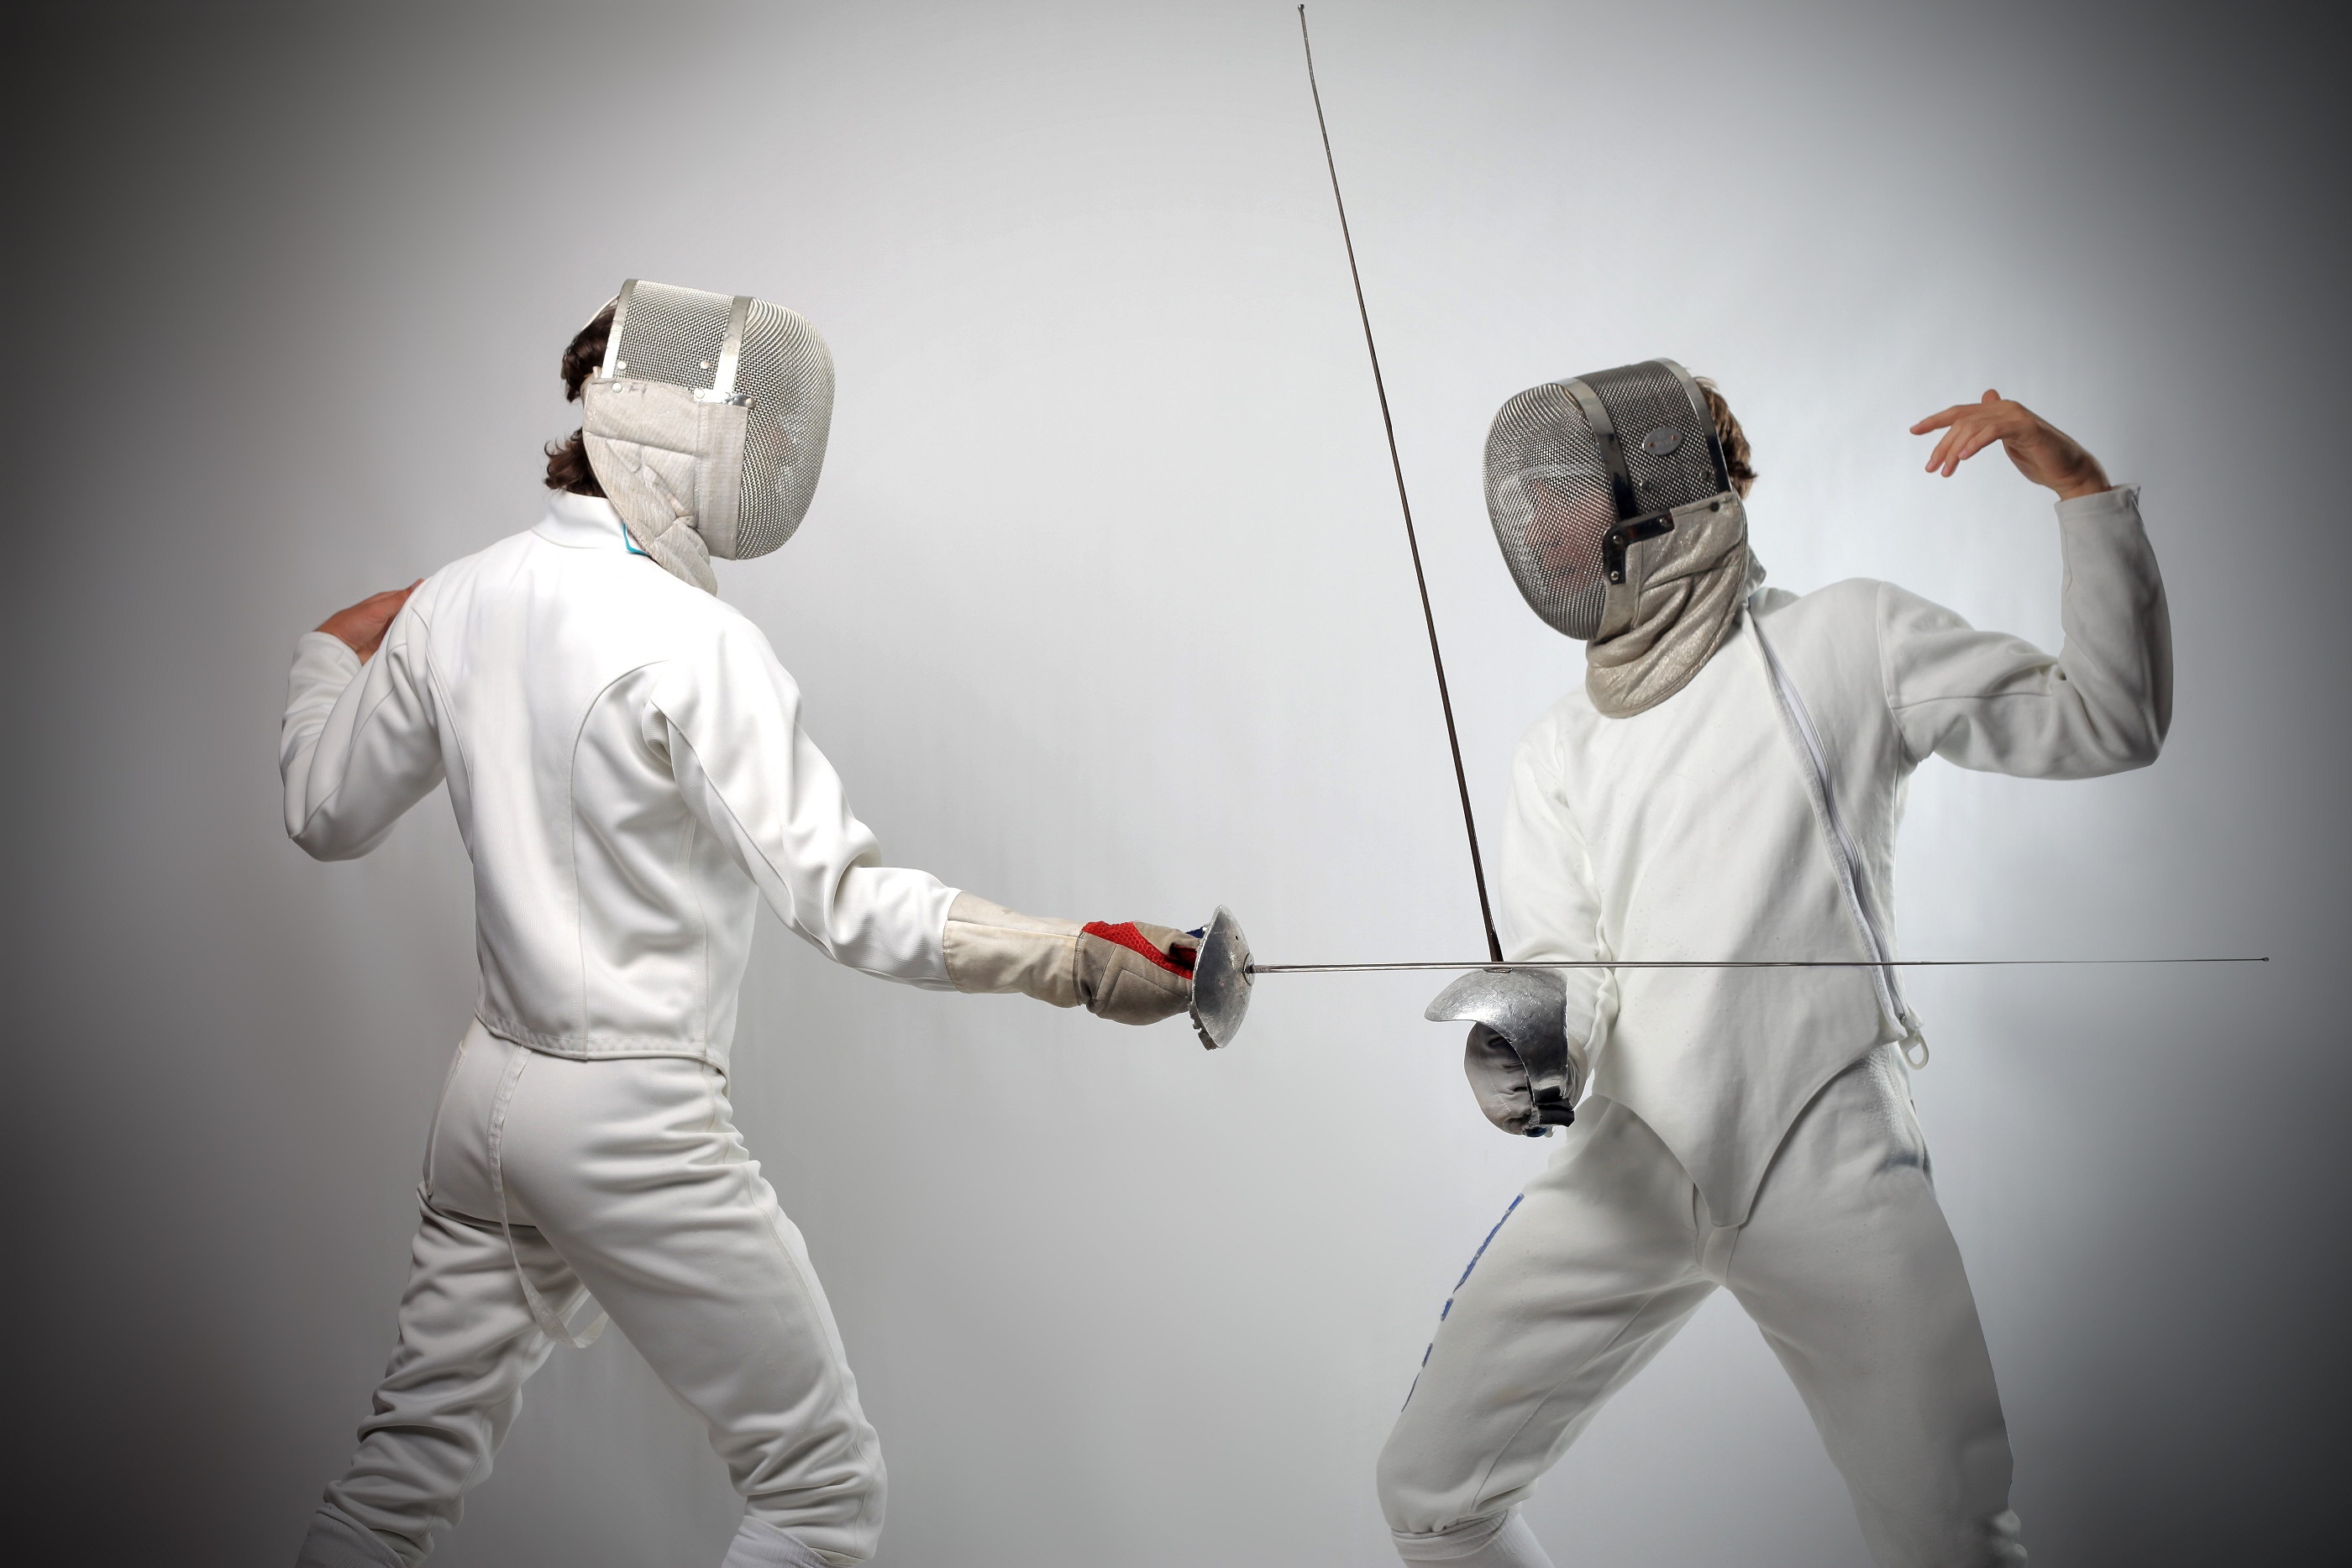 fencing, sports, white background